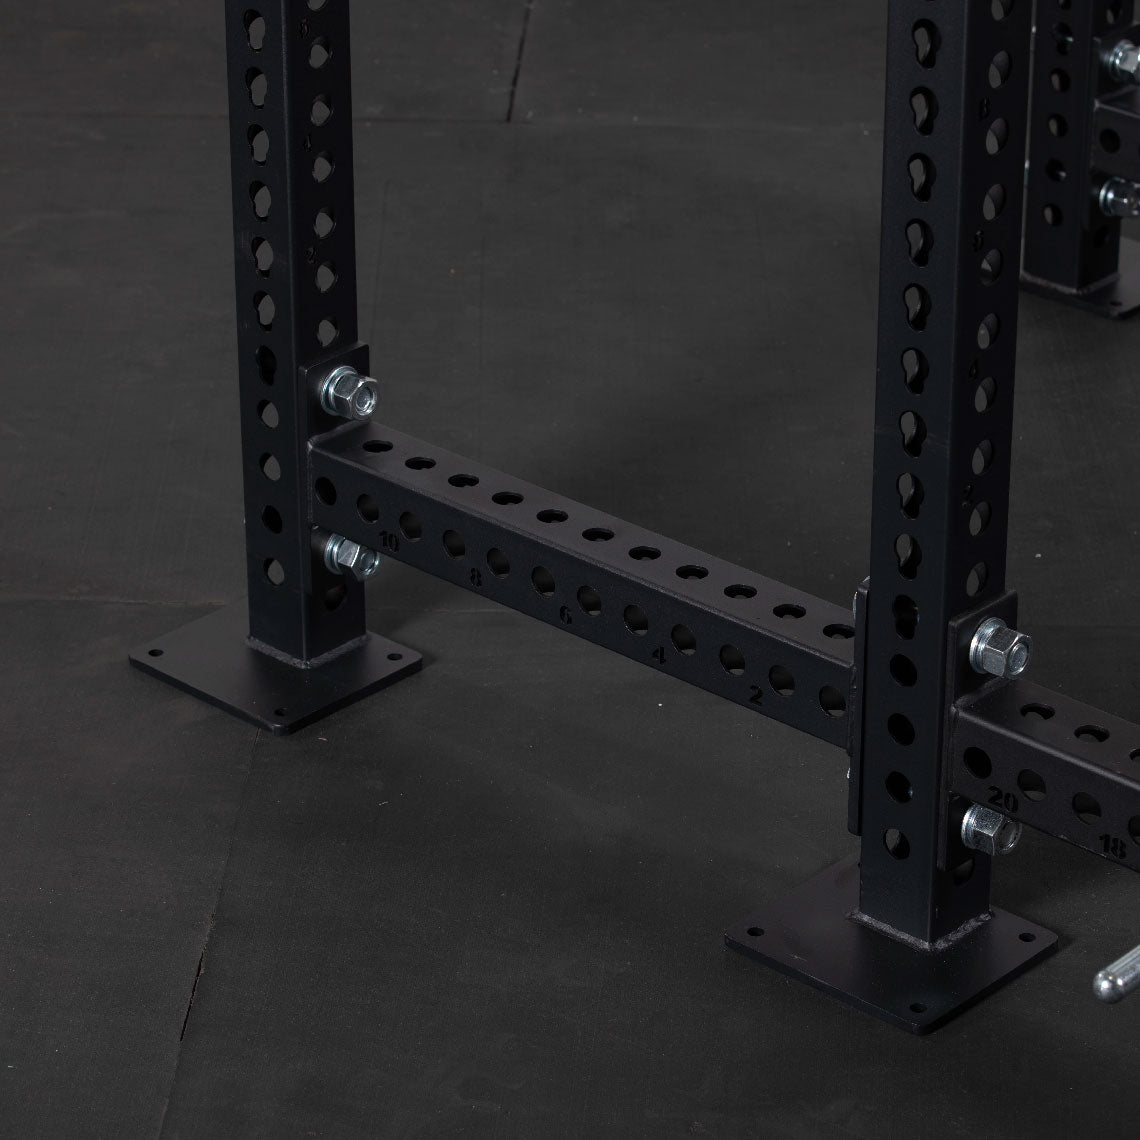 TITAN Series 24" Extension Kit - Extension Color: Black - Extension Height: 100" - Crossmember: 1.25" Pull-Up Bar | Black / 100" / 1.25" Pull-Up Bar